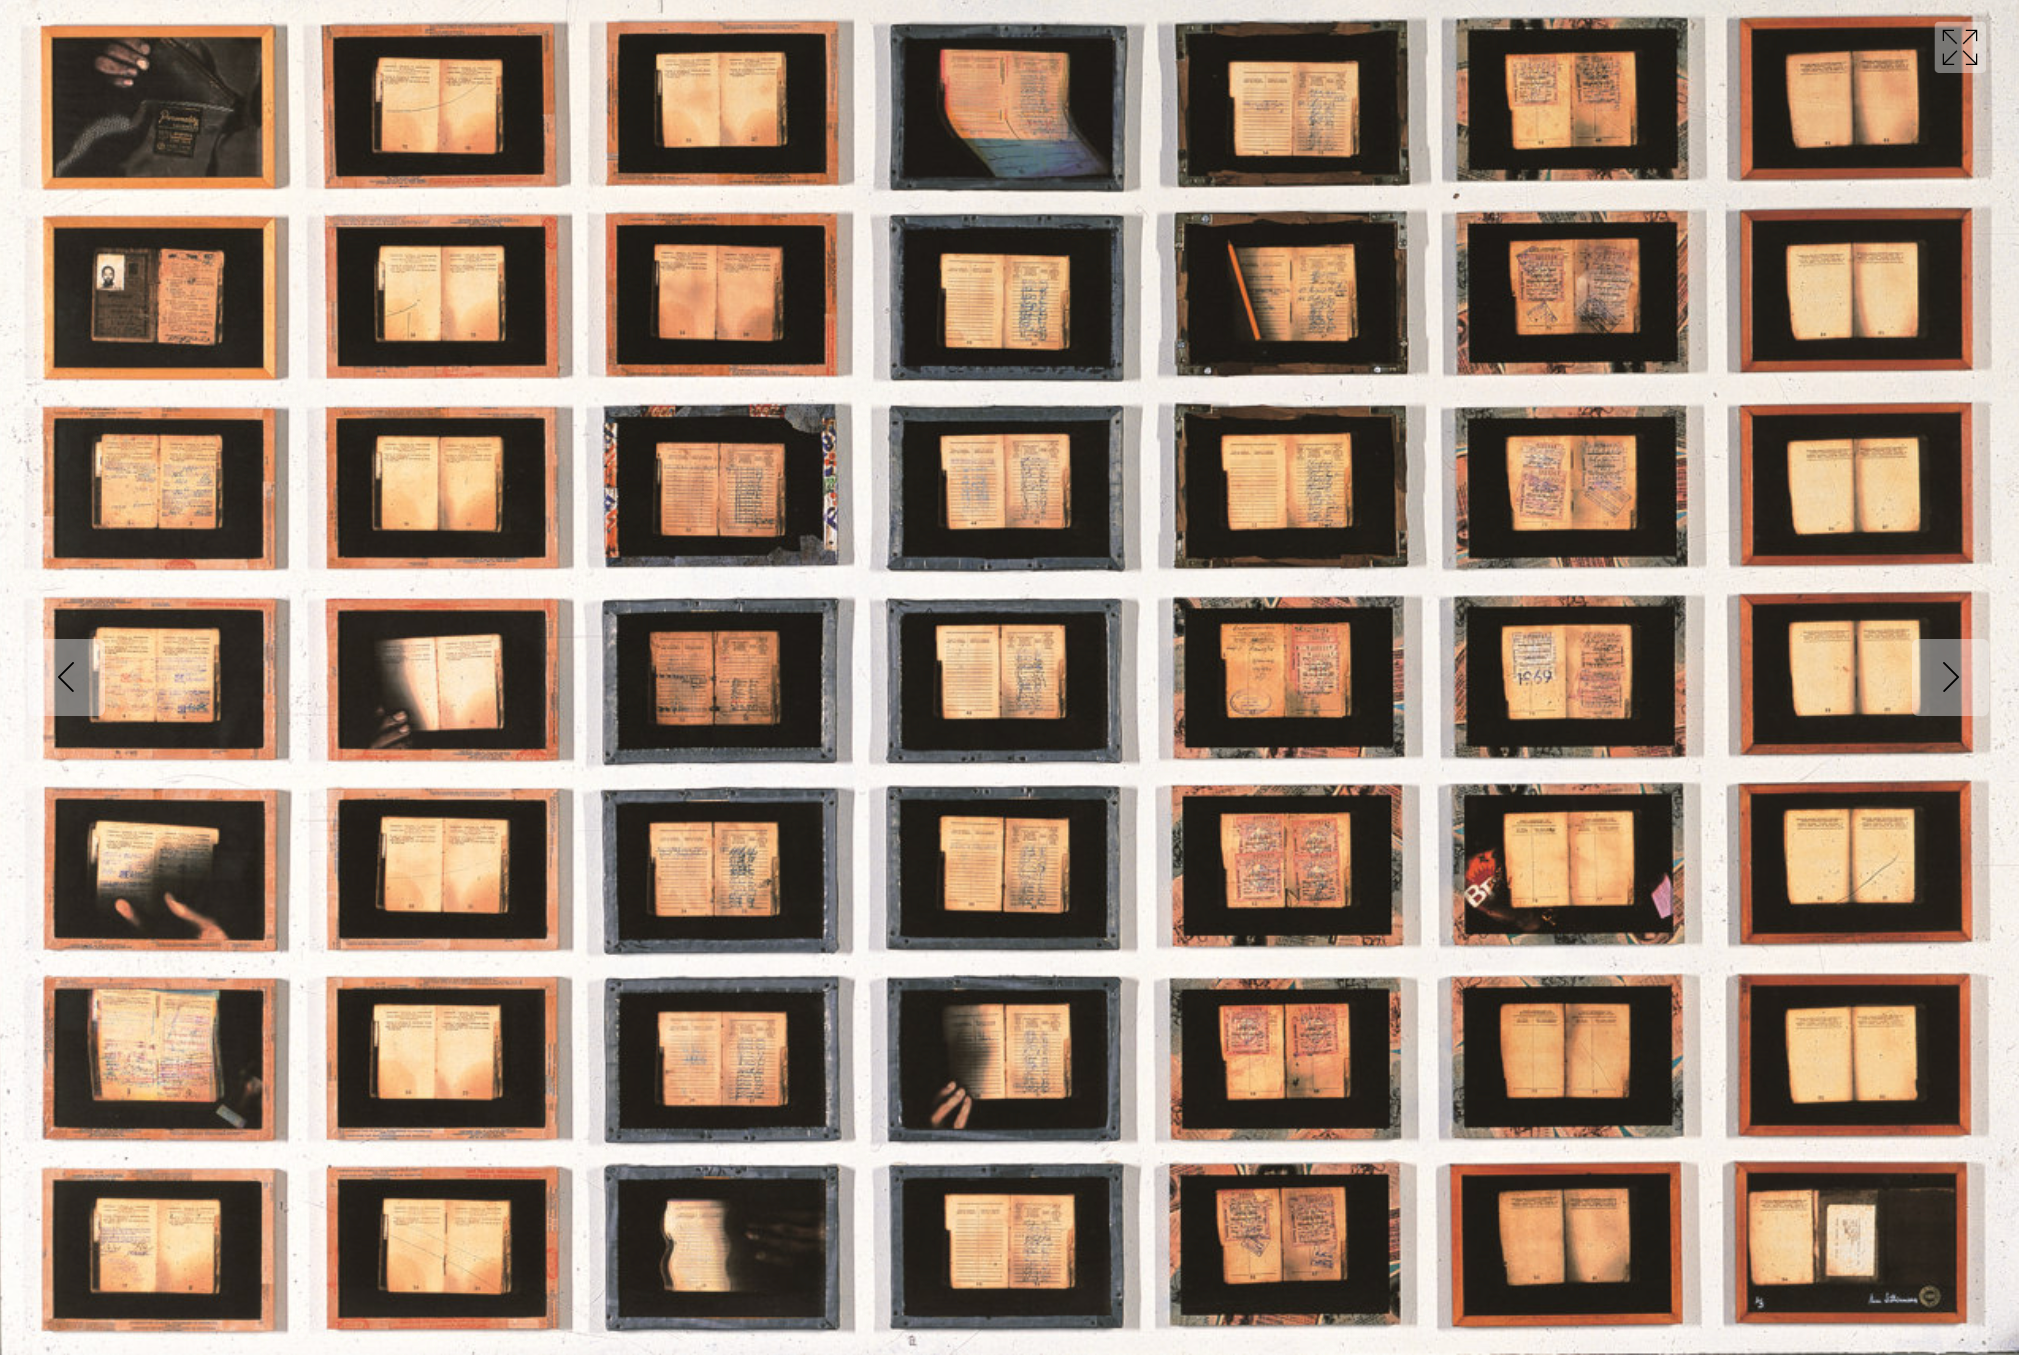 Sue Williamson’s framed grid of laser prints ‘For Thirty Years Next to His Heart’ depicts the inside pocket of a blazer and the pages of passbook.
